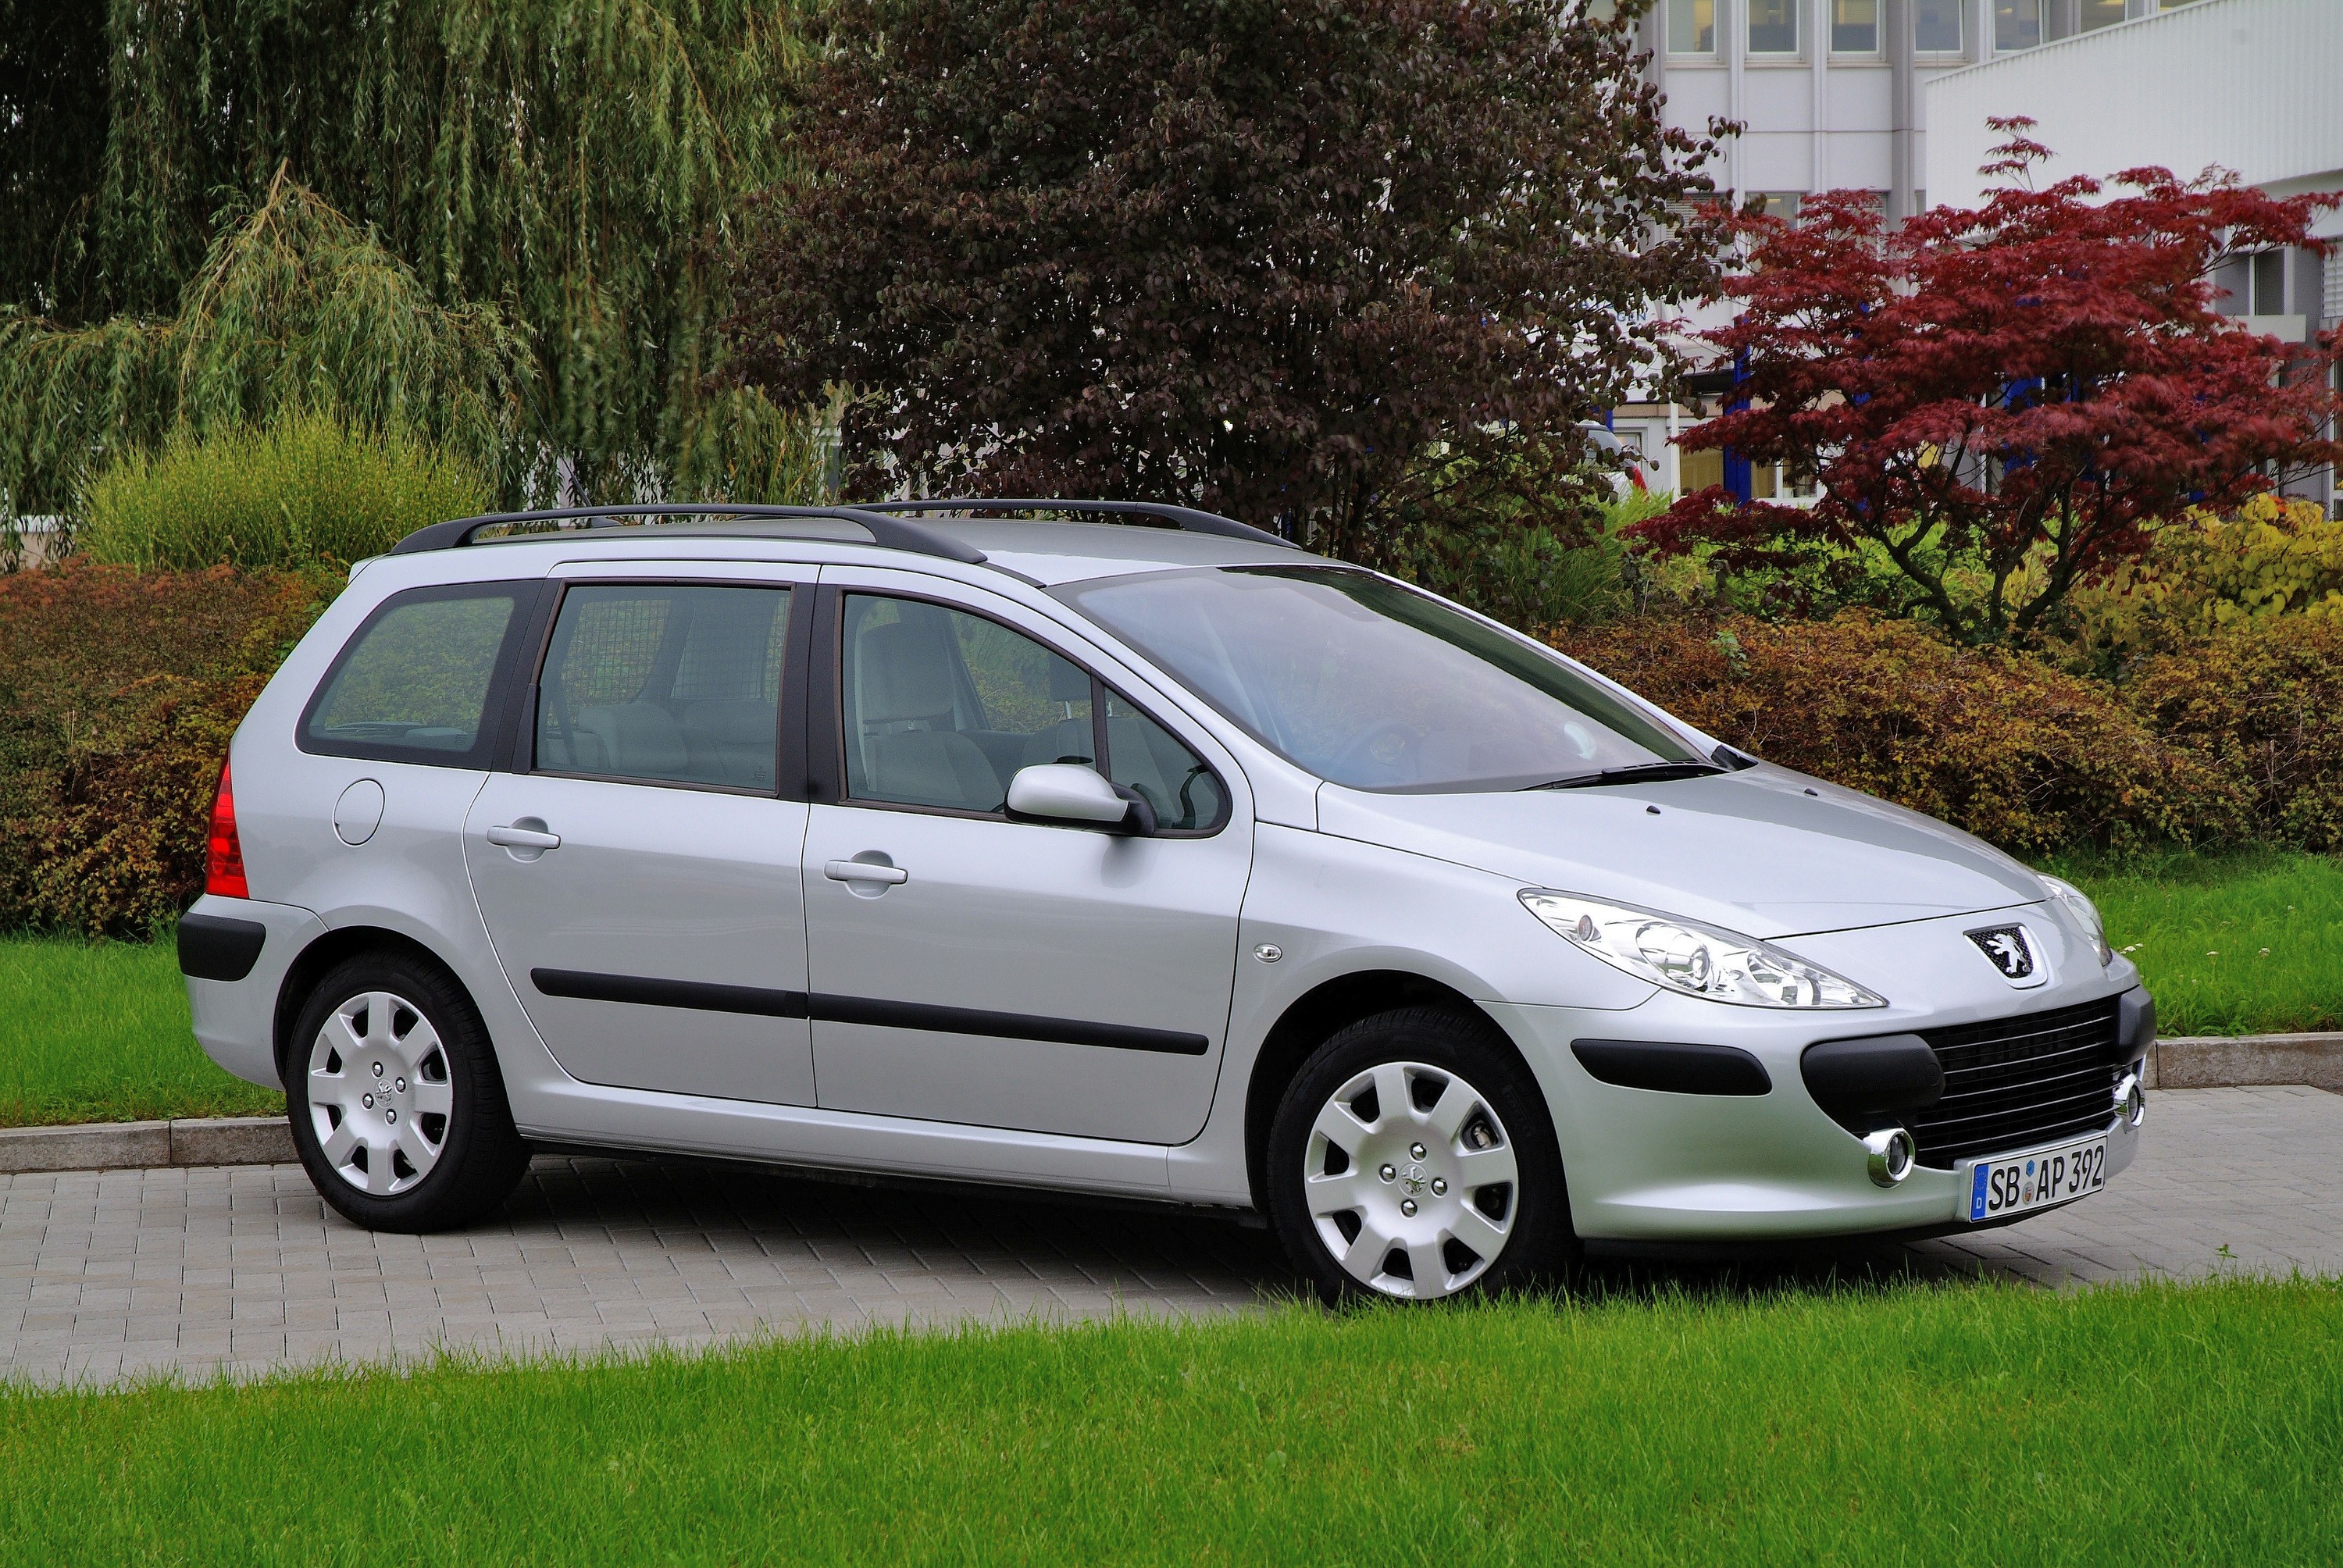 Used car review: Peugeot 307 2005-2008 - Drive